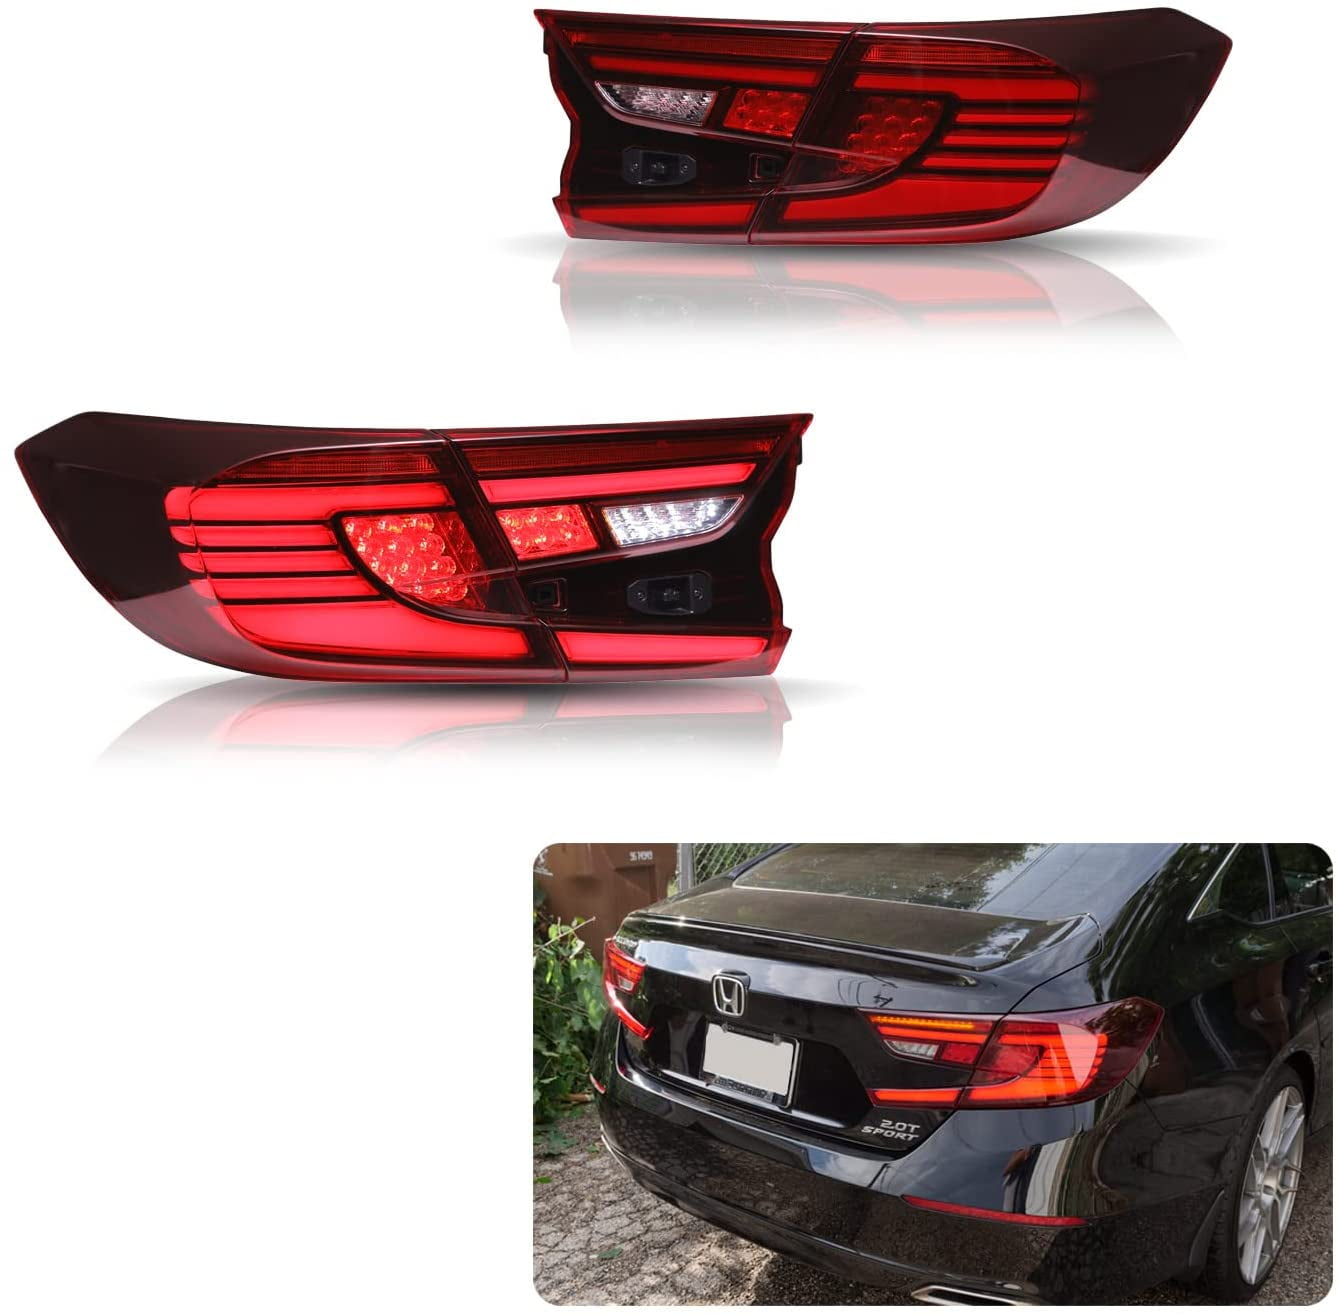 inginuity time LED RED Tail Lights For Honda Accord 10th Gen 2018 2019 2020  2021 2022 Animation DRL Sequential Indicator Red Rear Lamp Assembly -  